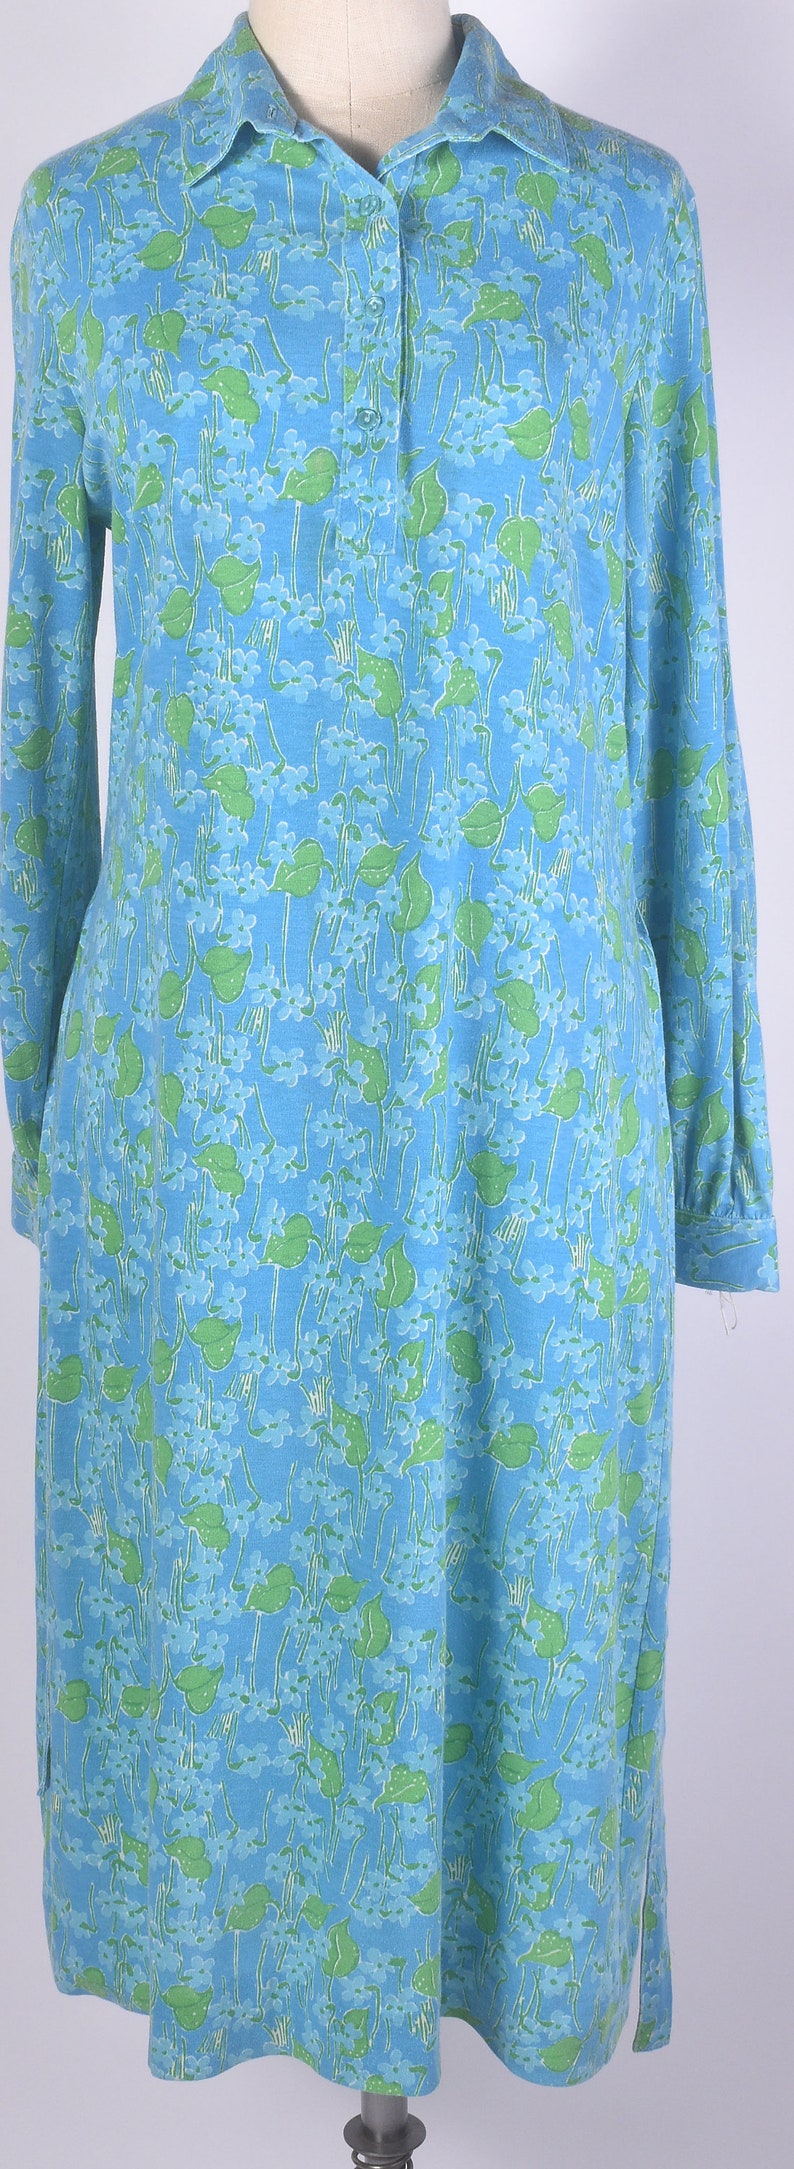 Vintage 70s Dress 70s Lilly Pulitzer Dress 70s Shirtwaist Dress Vintage Lilly Pulitzer 70s Floral Dress Large Lilly Pulitzer VFG image 3